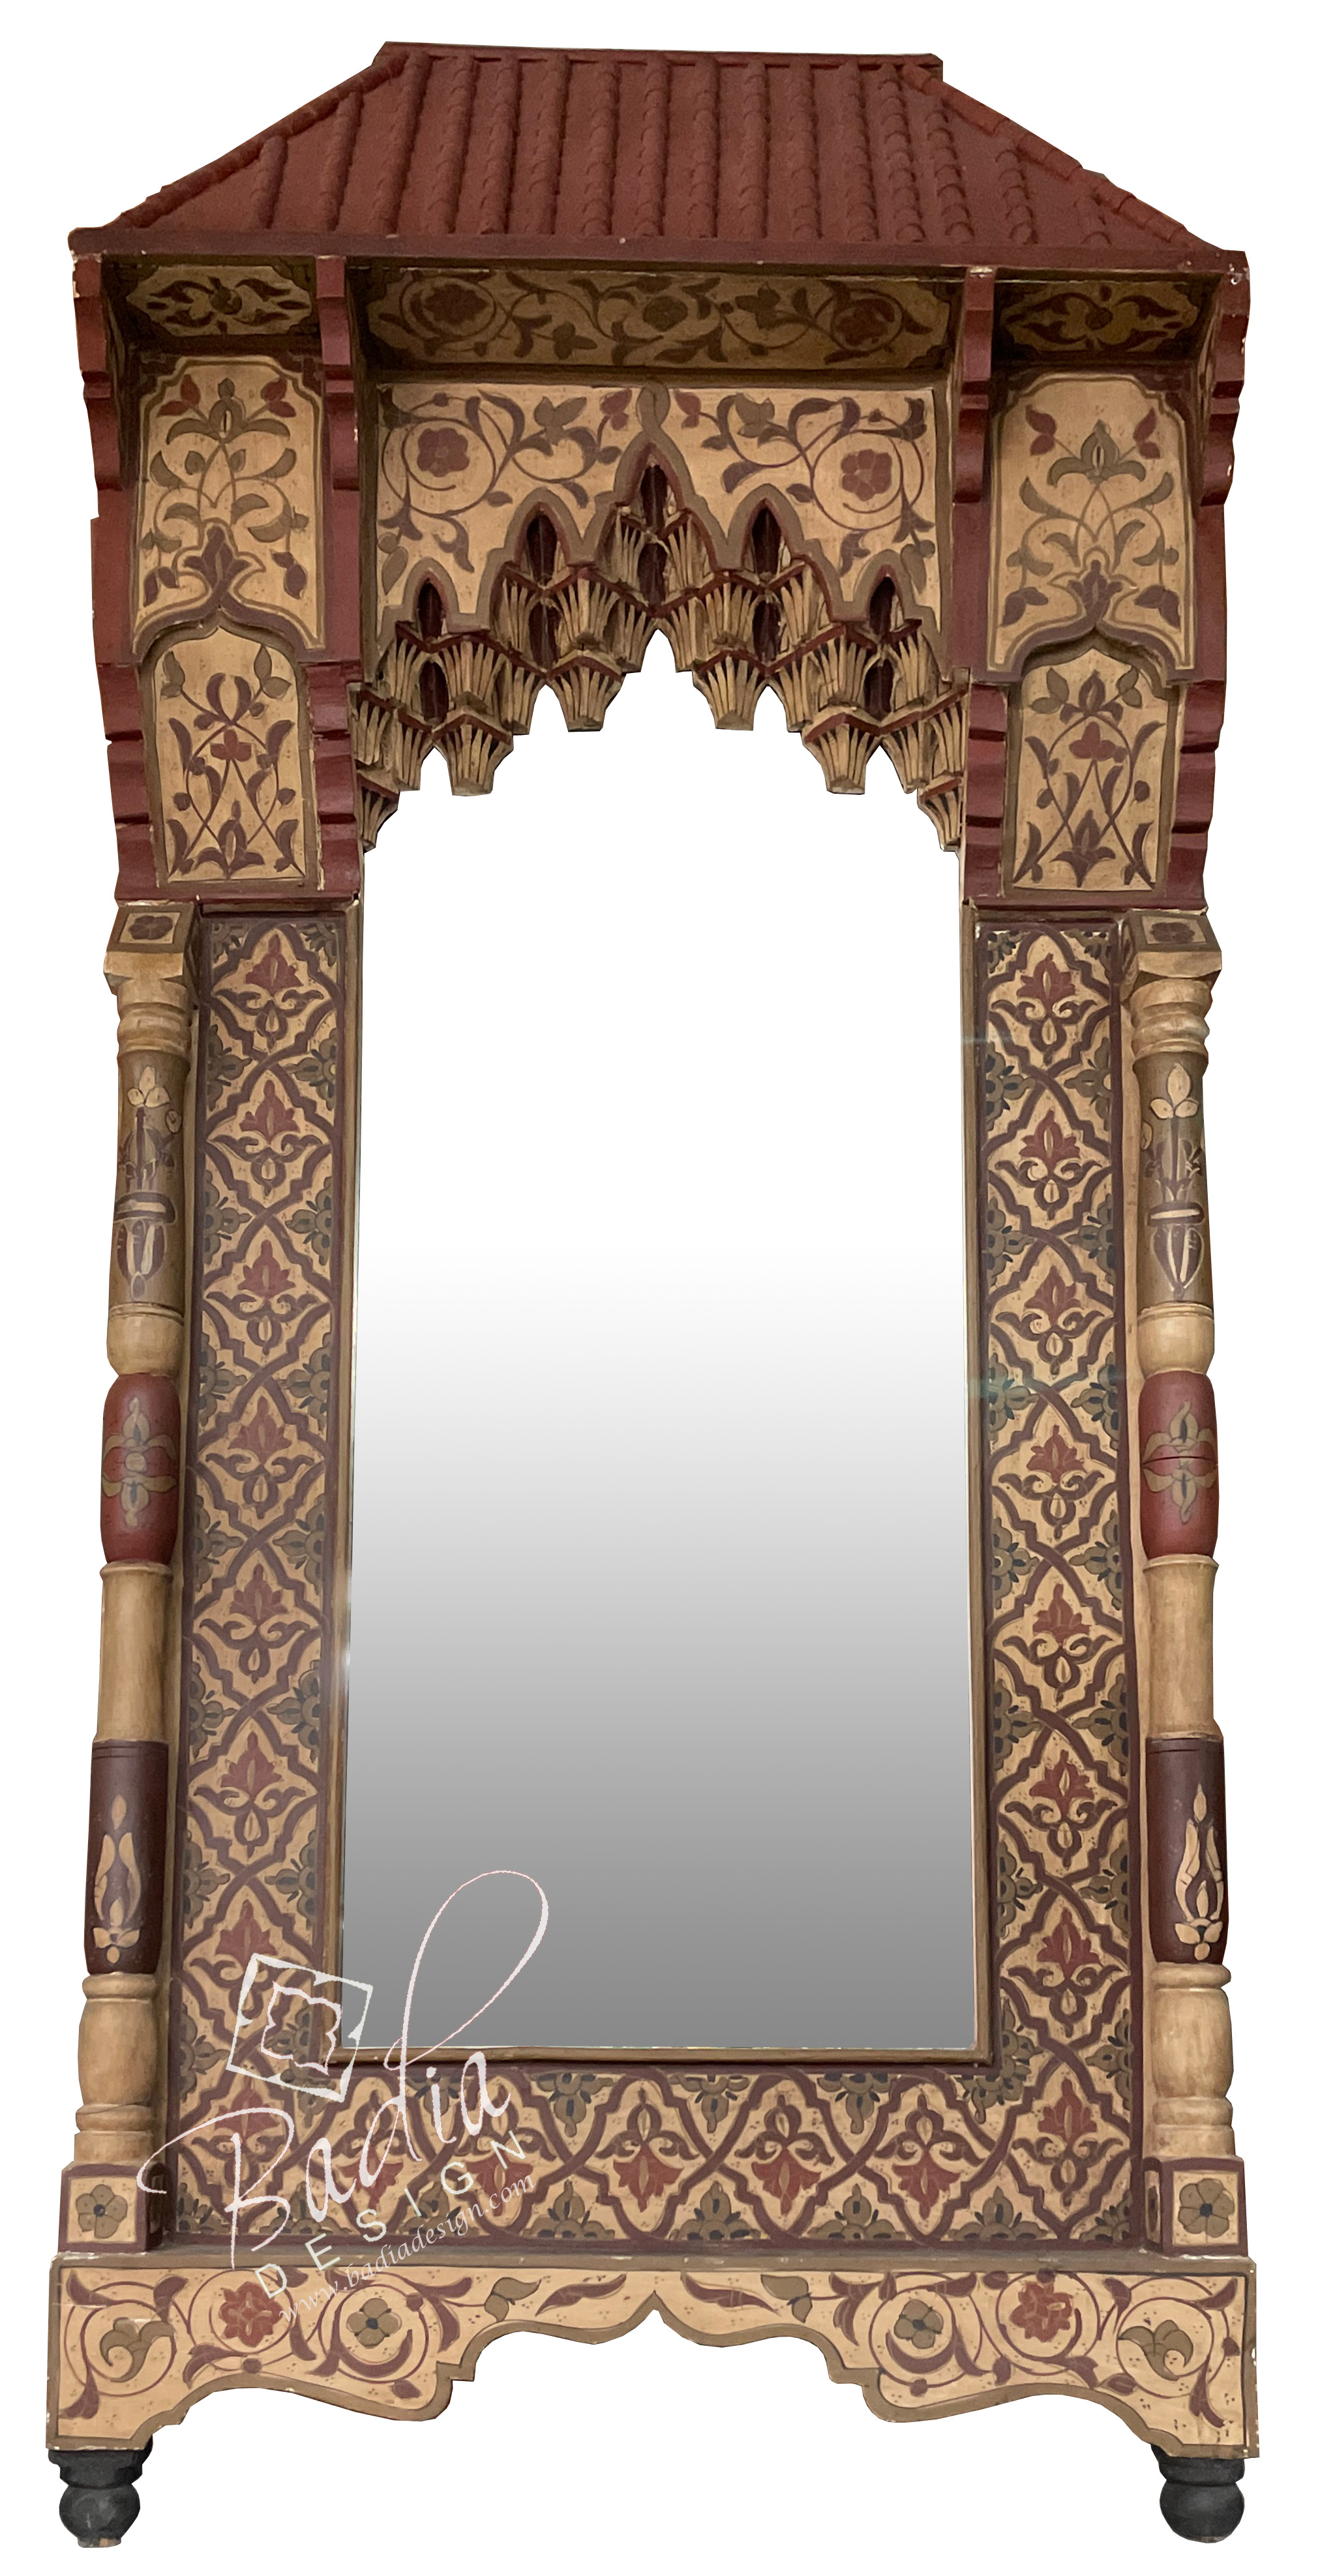 tall-moroccan-vintage-hand-painted-mirror-m-w020.jpg